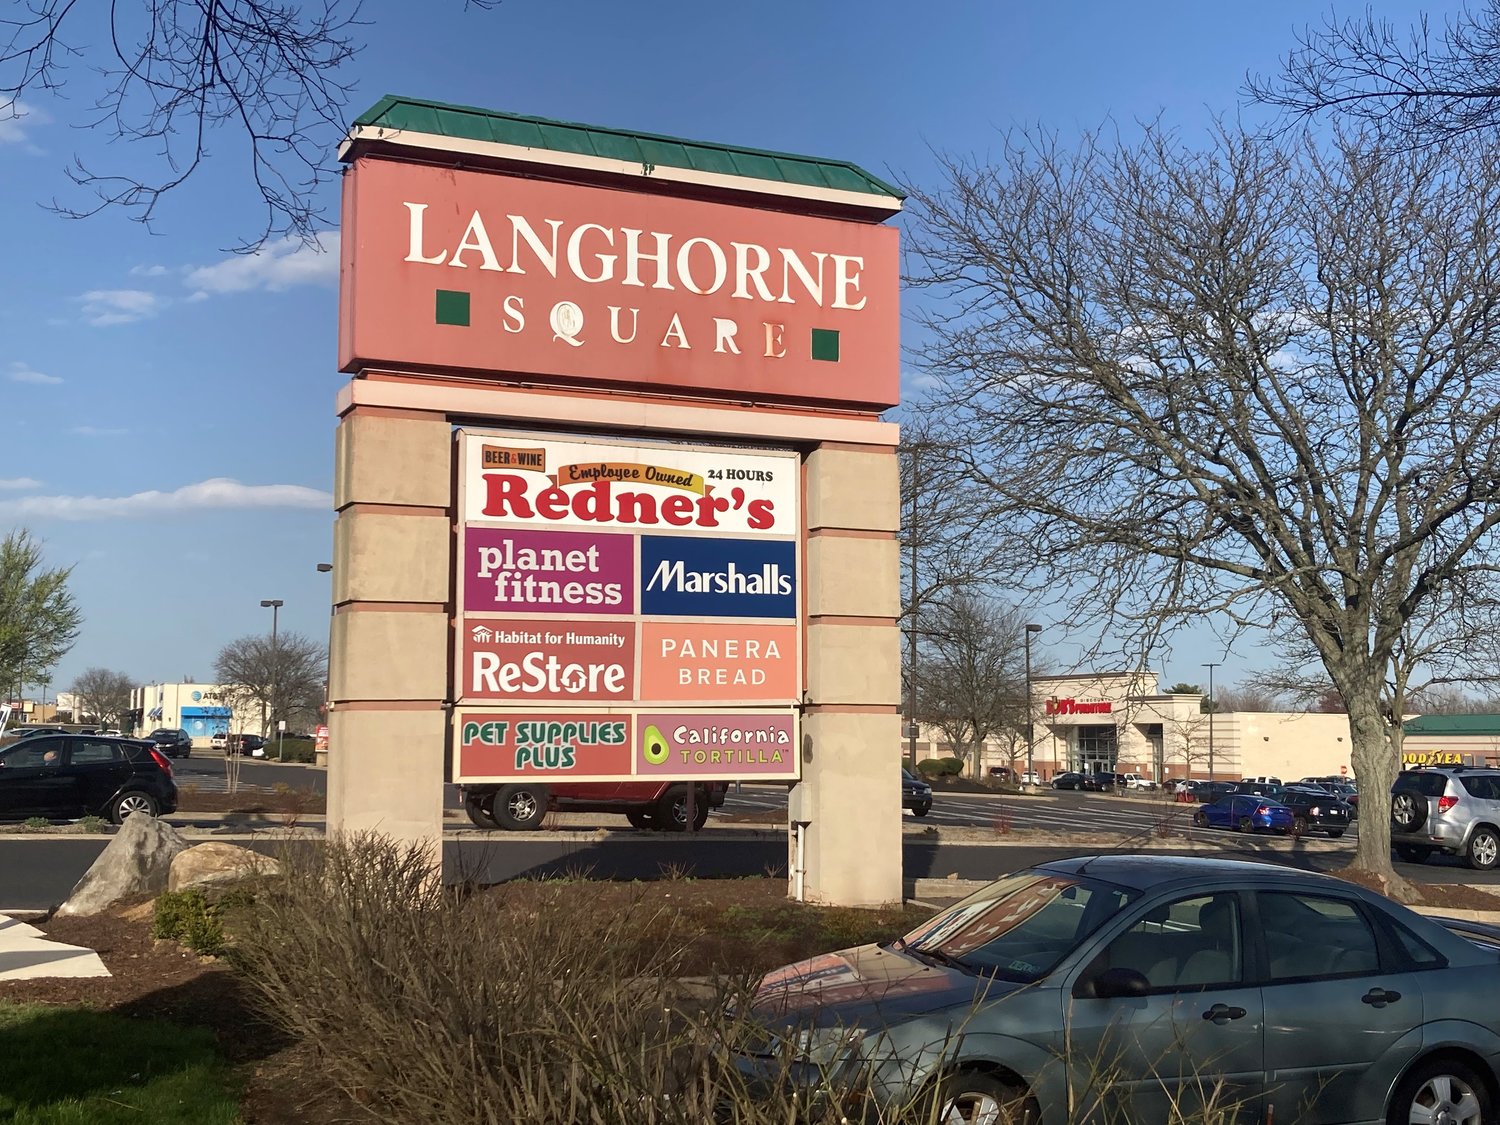 It’s uncertain whether a new Chick-fil-A will be coming to the Langhorne Square Shopping Center in Middletown, despite receiving land development approval more than a year ago.